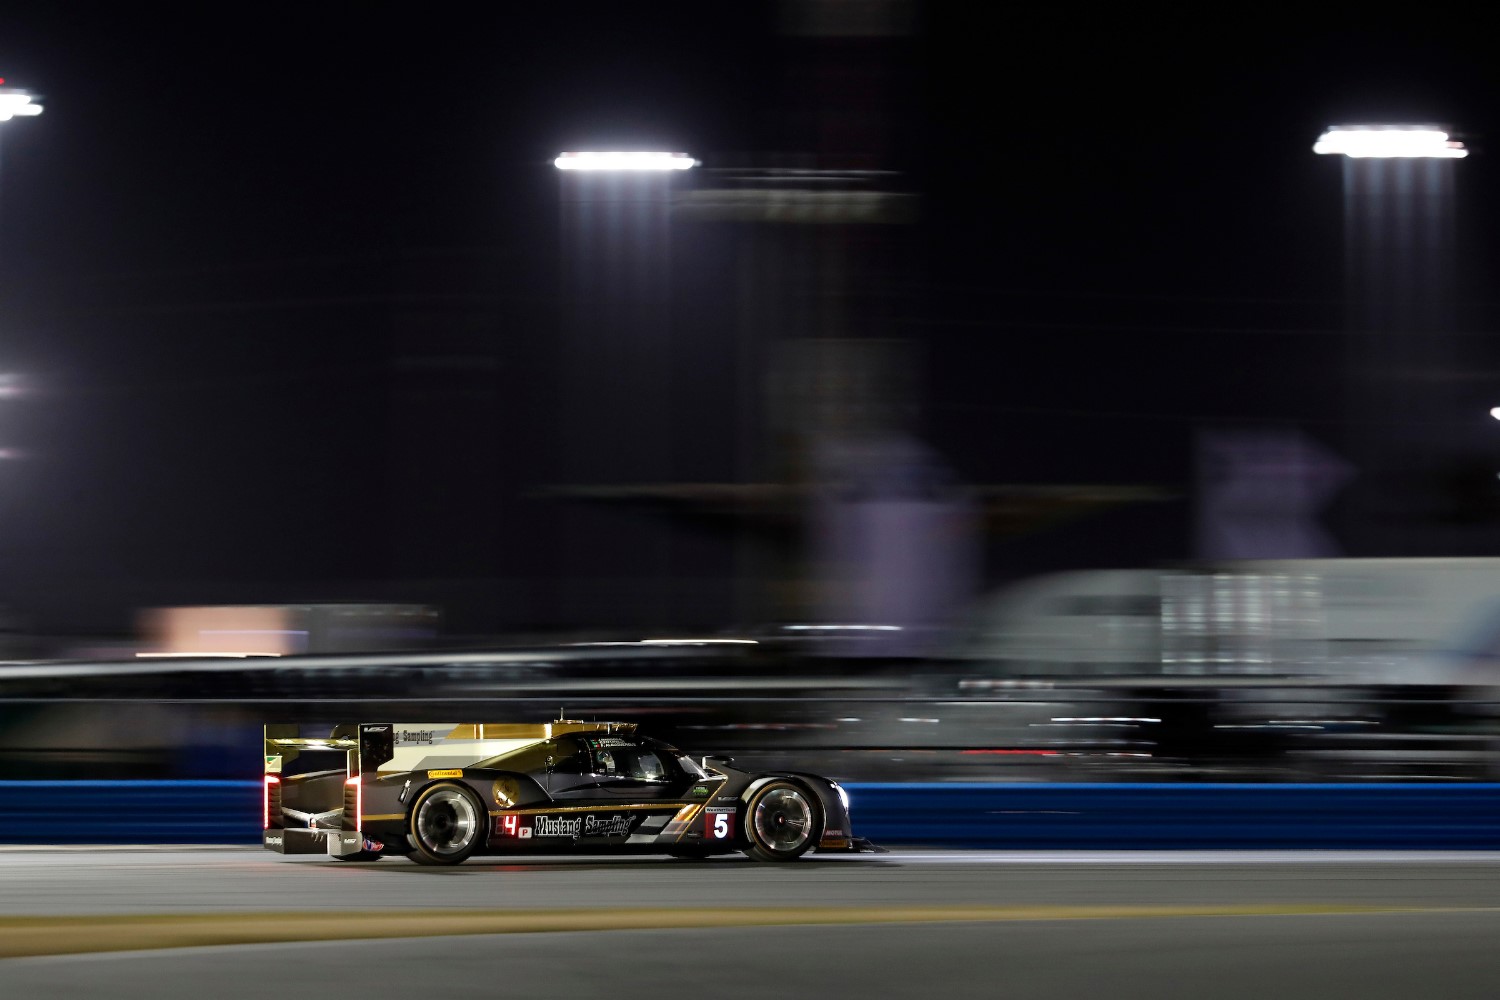 The #5 Cadillac holds a 1-lap lead in the Rolex 24